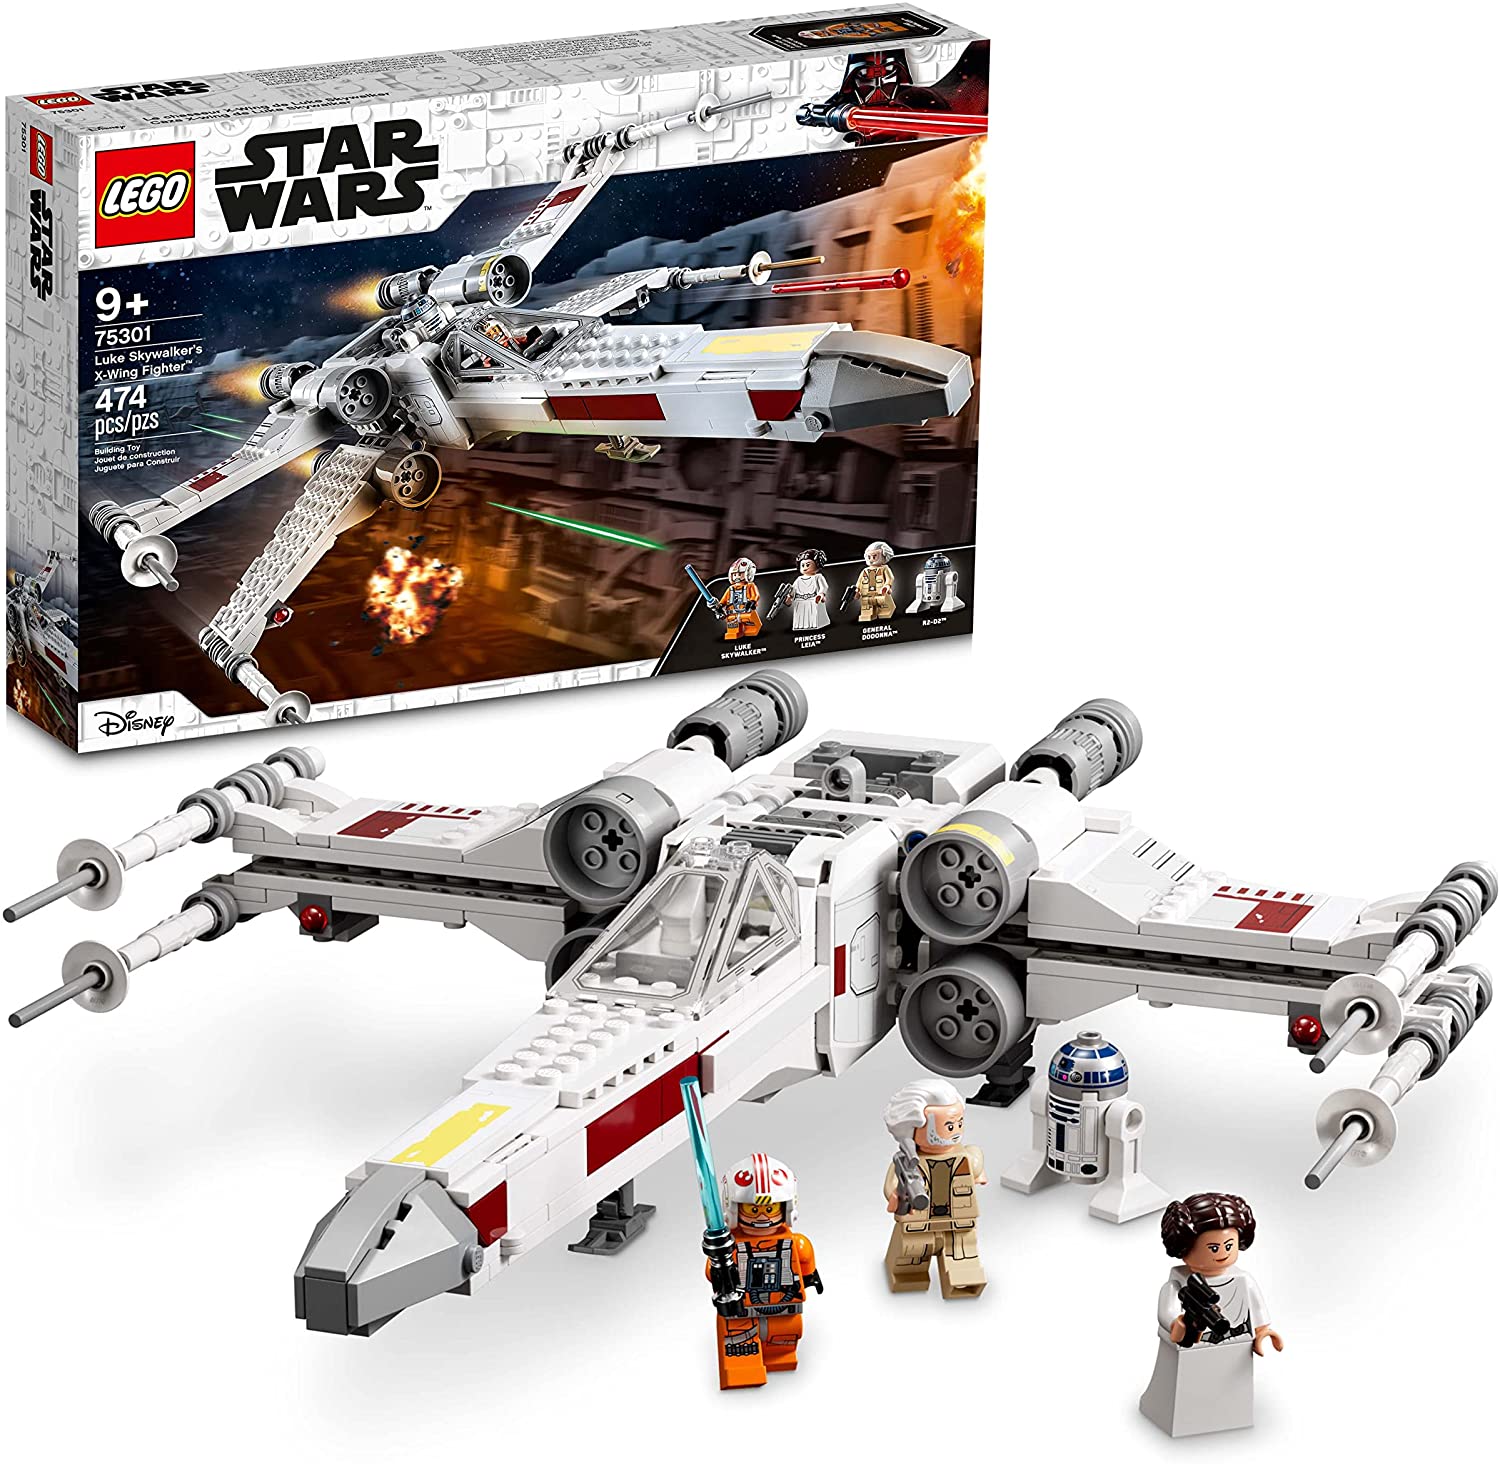 LEGO 75301 Star Wars Luke Skywalker’s X-Wing Fighter Toy with Princess Leia